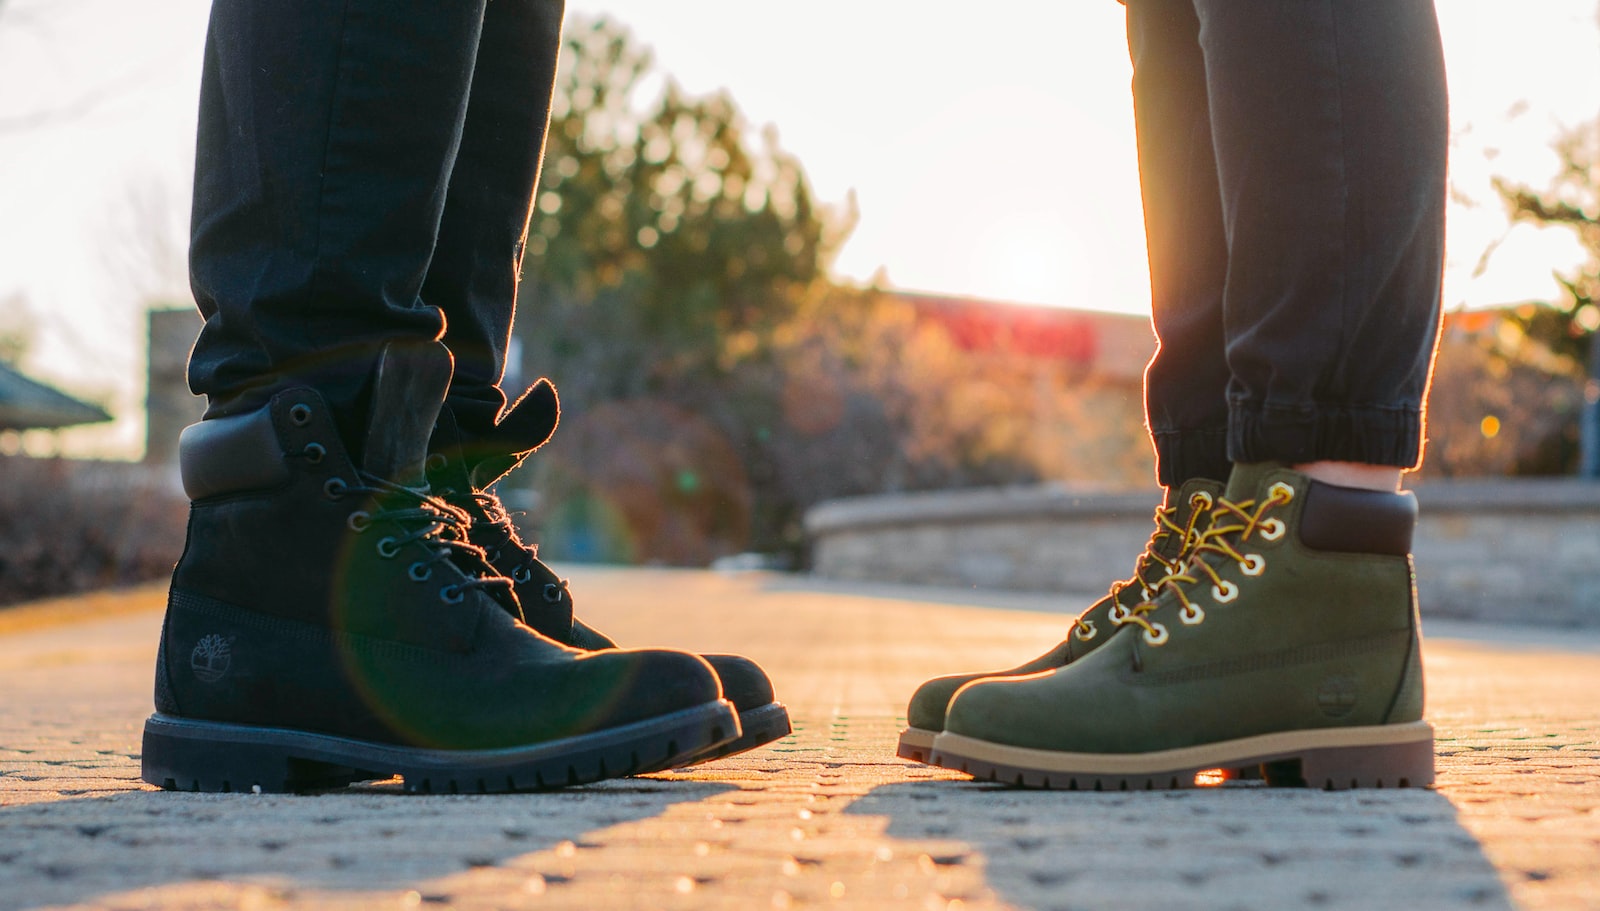 two people wearing green-and-black work boots standing on gray concrete pavement